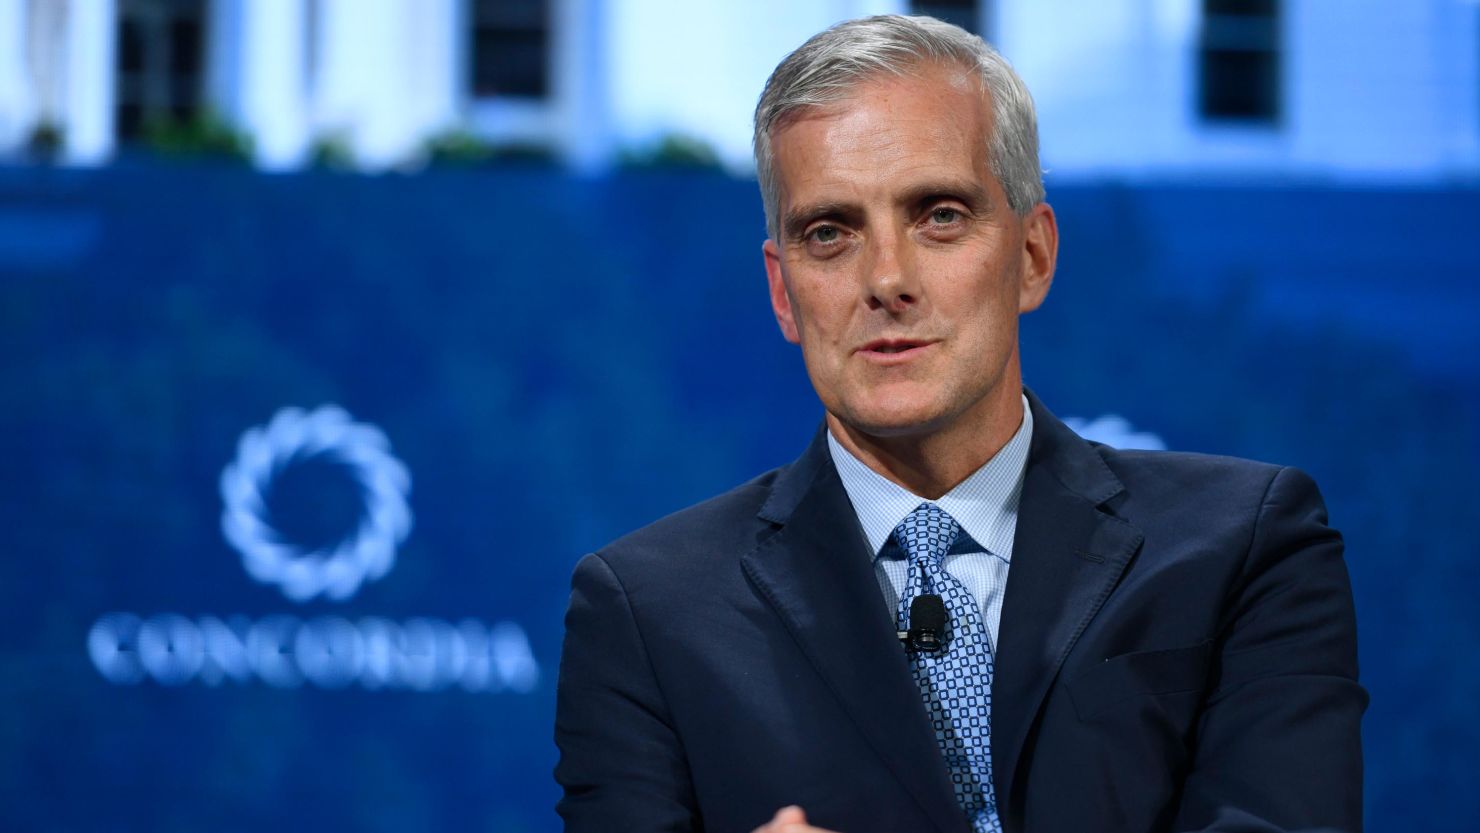 Denis McDonough speaks at an event in New York in September 2018. McDonough has been nominated as secretary of Veterans Affairs in the Biden administration. 